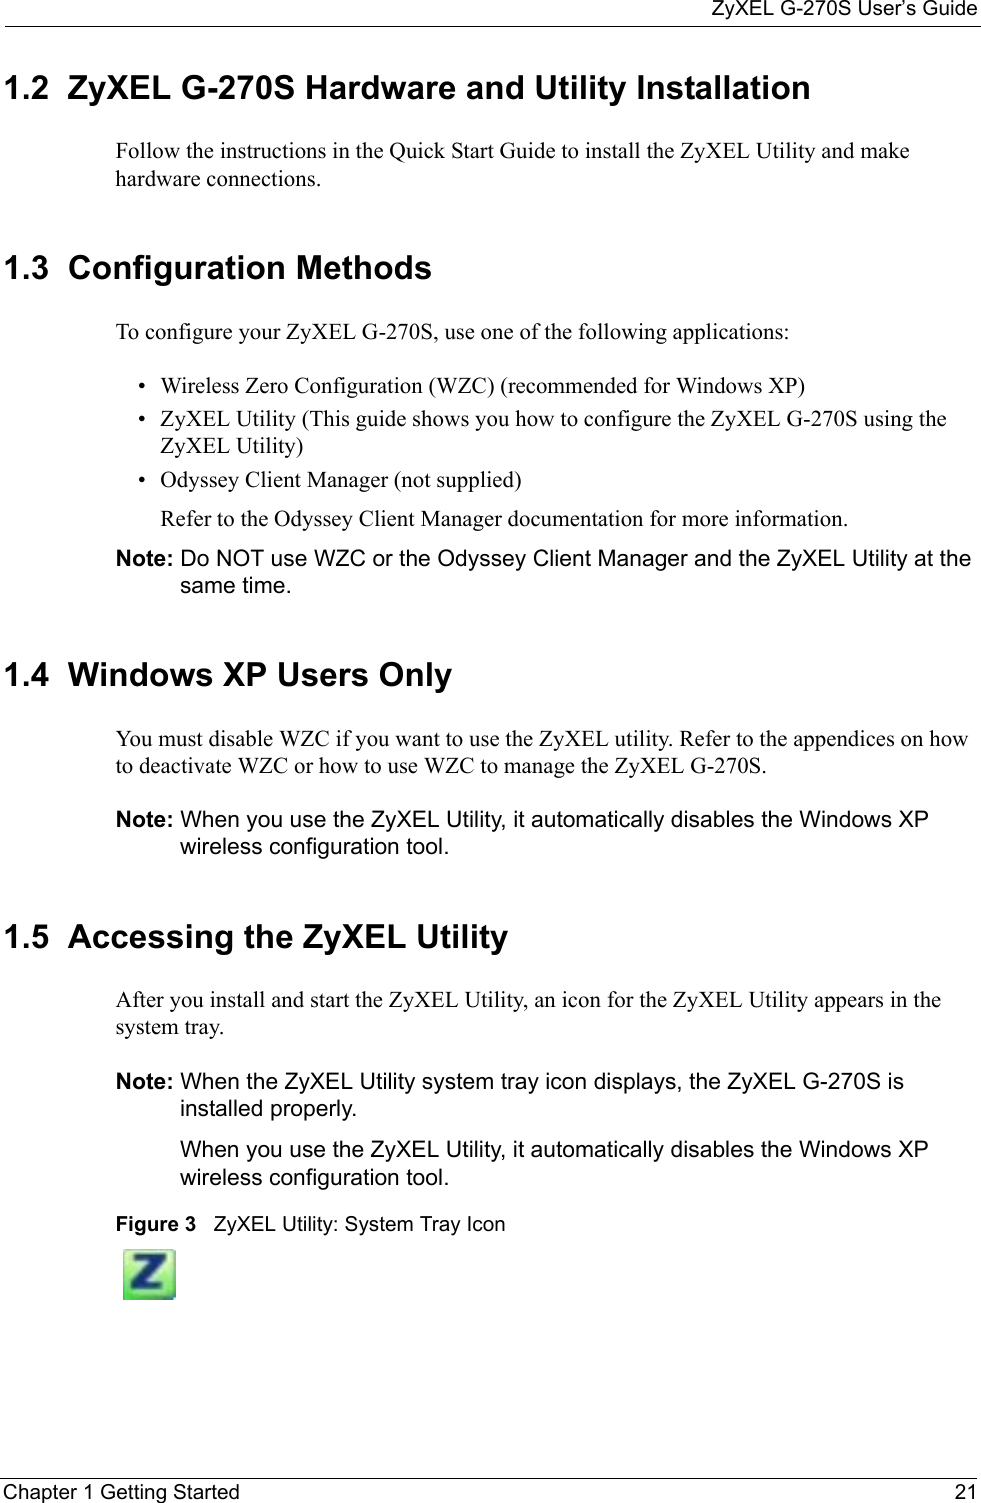 ZyXEL G-270S User’s GuideChapter 1 Getting Started 211.2  ZyXEL G-270S Hardware and Utility InstallationFollow the instructions in the Quick Start Guide to install the ZyXEL Utility and make hardware connections.1.3  Configuration Methods   To configure your ZyXEL G-270S, use one of the following applications:• Wireless Zero Configuration (WZC) (recommended for Windows XP)• ZyXEL Utility (This guide shows you how to configure the ZyXEL G-270S using the ZyXEL Utility)• Odyssey Client Manager (not supplied) Refer to the Odyssey Client Manager documentation for more information.Note: Do NOT use WZC or the Odyssey Client Manager and the ZyXEL Utility at the same time.1.4  Windows XP Users Only You must disable WZC if you want to use the ZyXEL utility. Refer to the appendices on how to deactivate WZC or how to use WZC to manage the ZyXEL G-270S.Note: When you use the ZyXEL Utility, it automatically disables the Windows XP wireless configuration tool. 1.5  Accessing the ZyXEL Utility After you install and start the ZyXEL Utility, an icon for the ZyXEL Utility appears in the system tray.Note: When the ZyXEL Utility system tray icon displays, the ZyXEL G-270S is installed properly.When you use the ZyXEL Utility, it automatically disables the Windows XP wireless configuration tool. Figure 3   ZyXEL Utility: System Tray Icon 